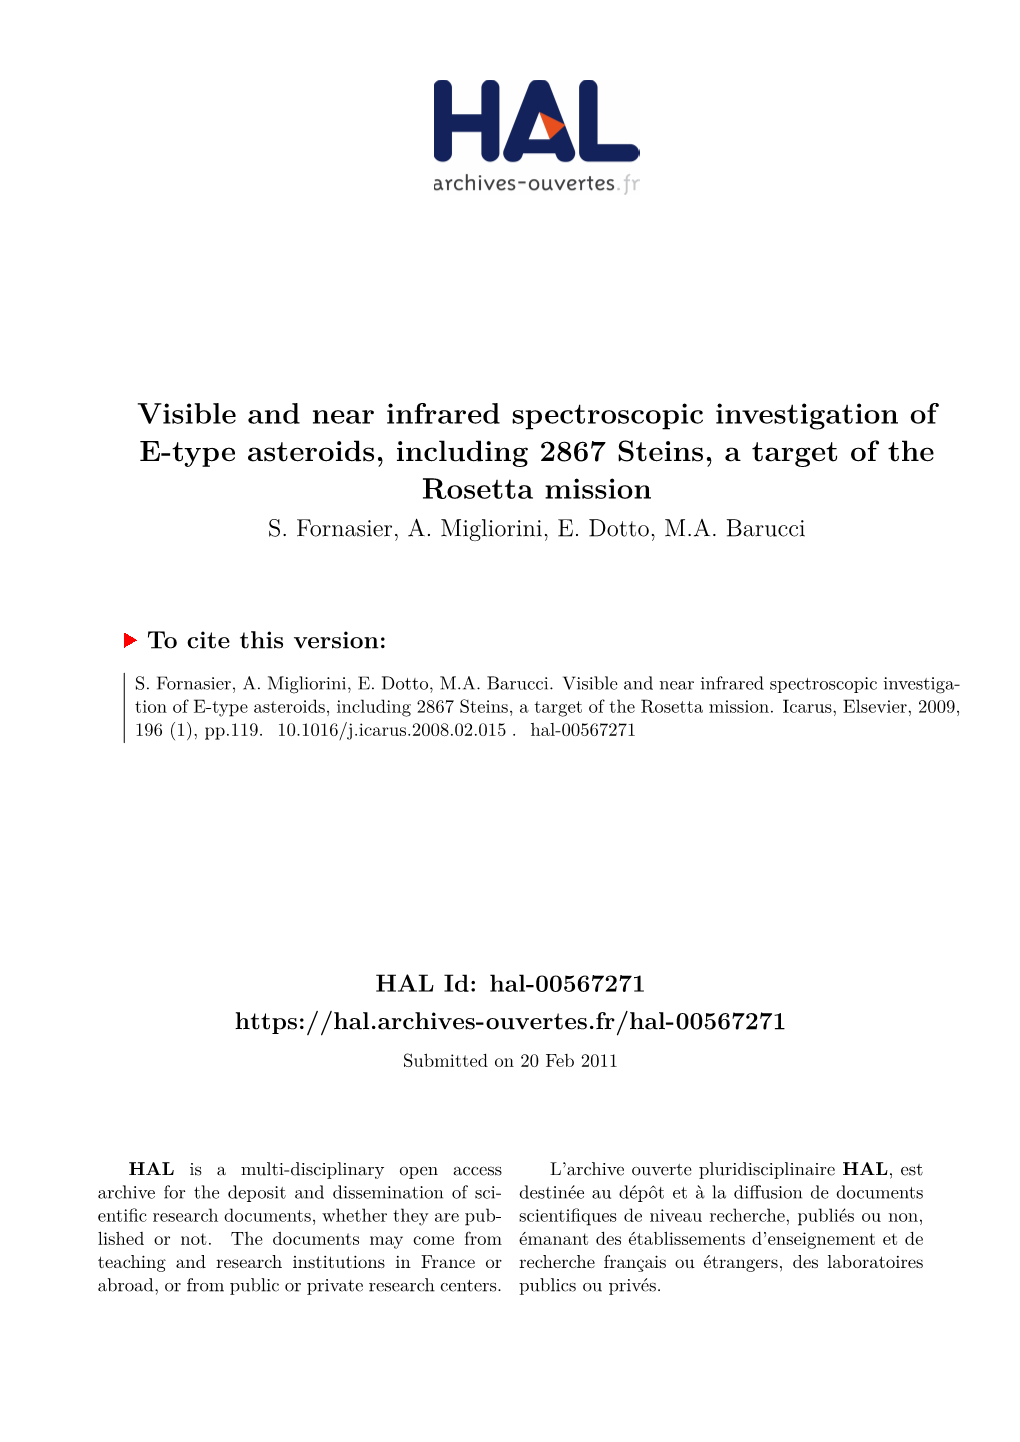 Visible and Near Infrared Spectroscopic Investigation of E-Type Asteroids, Including 2867 Steins, a Target of the Rosetta Mission S